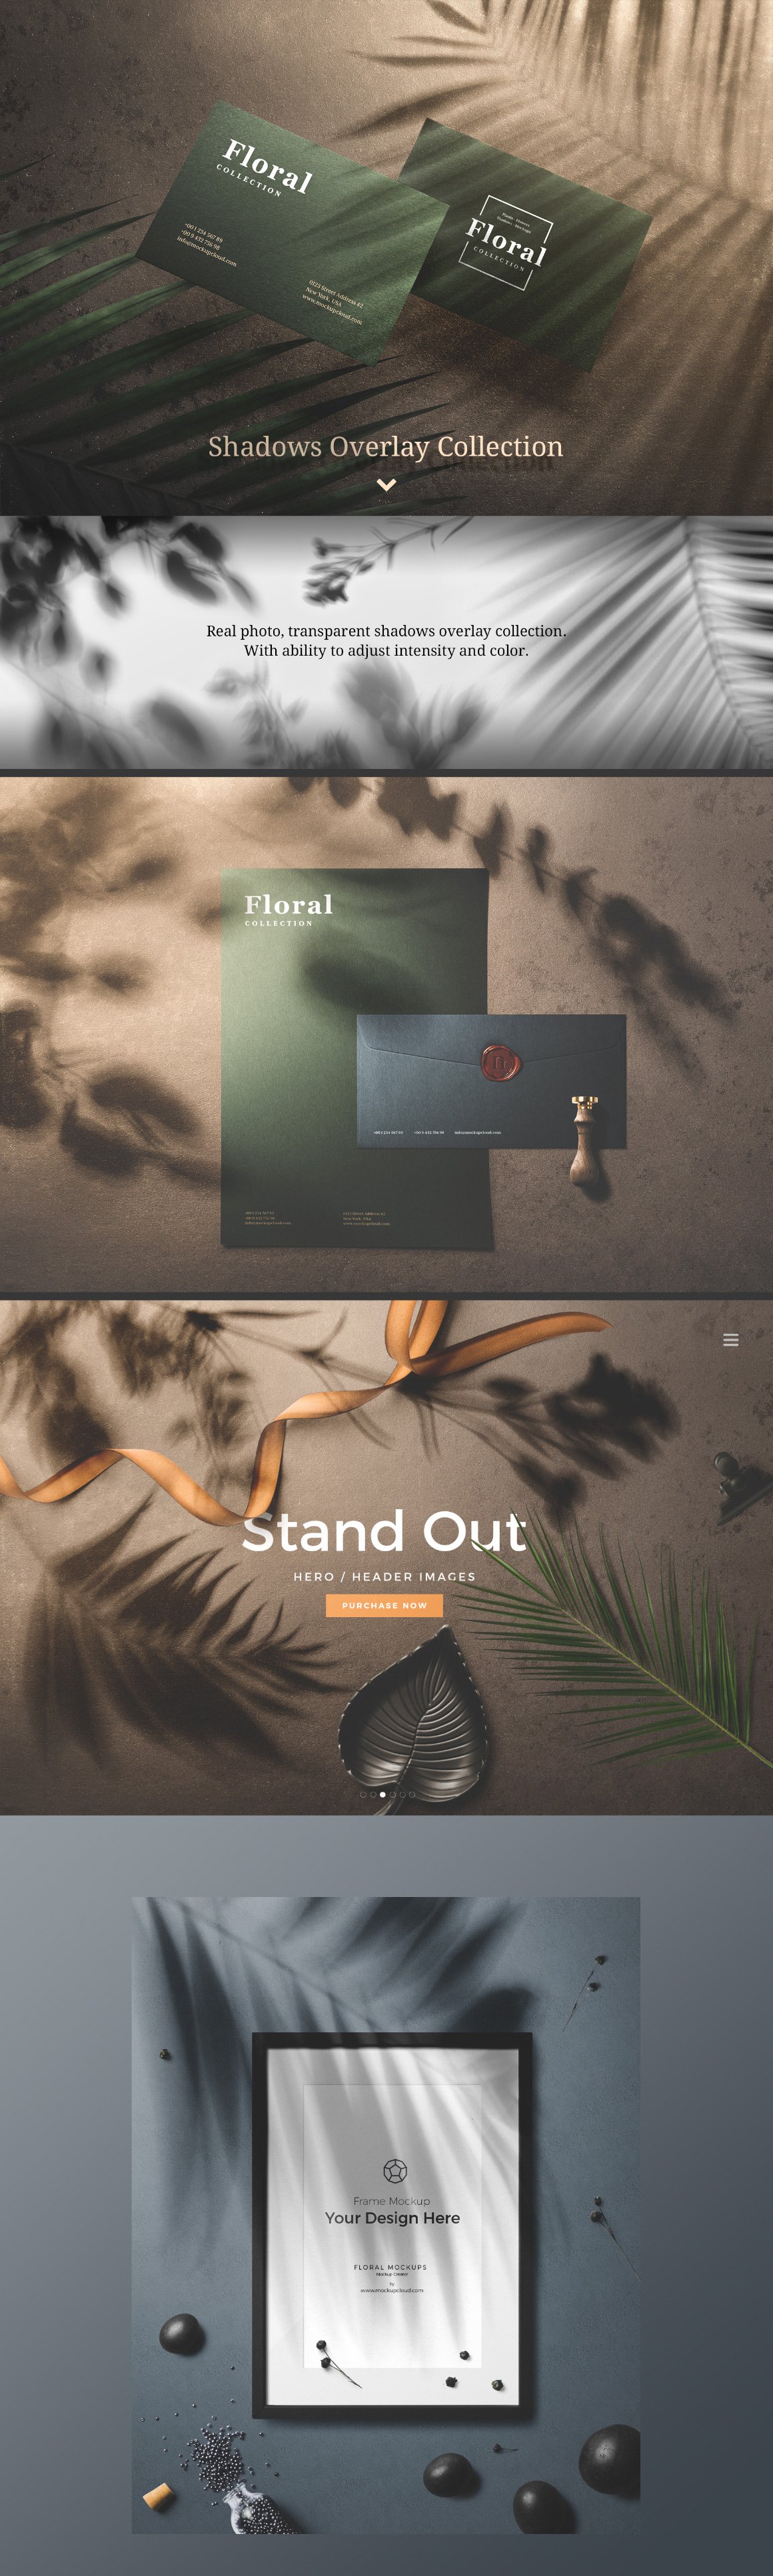 The Mammoth Mockup Template Toolkit